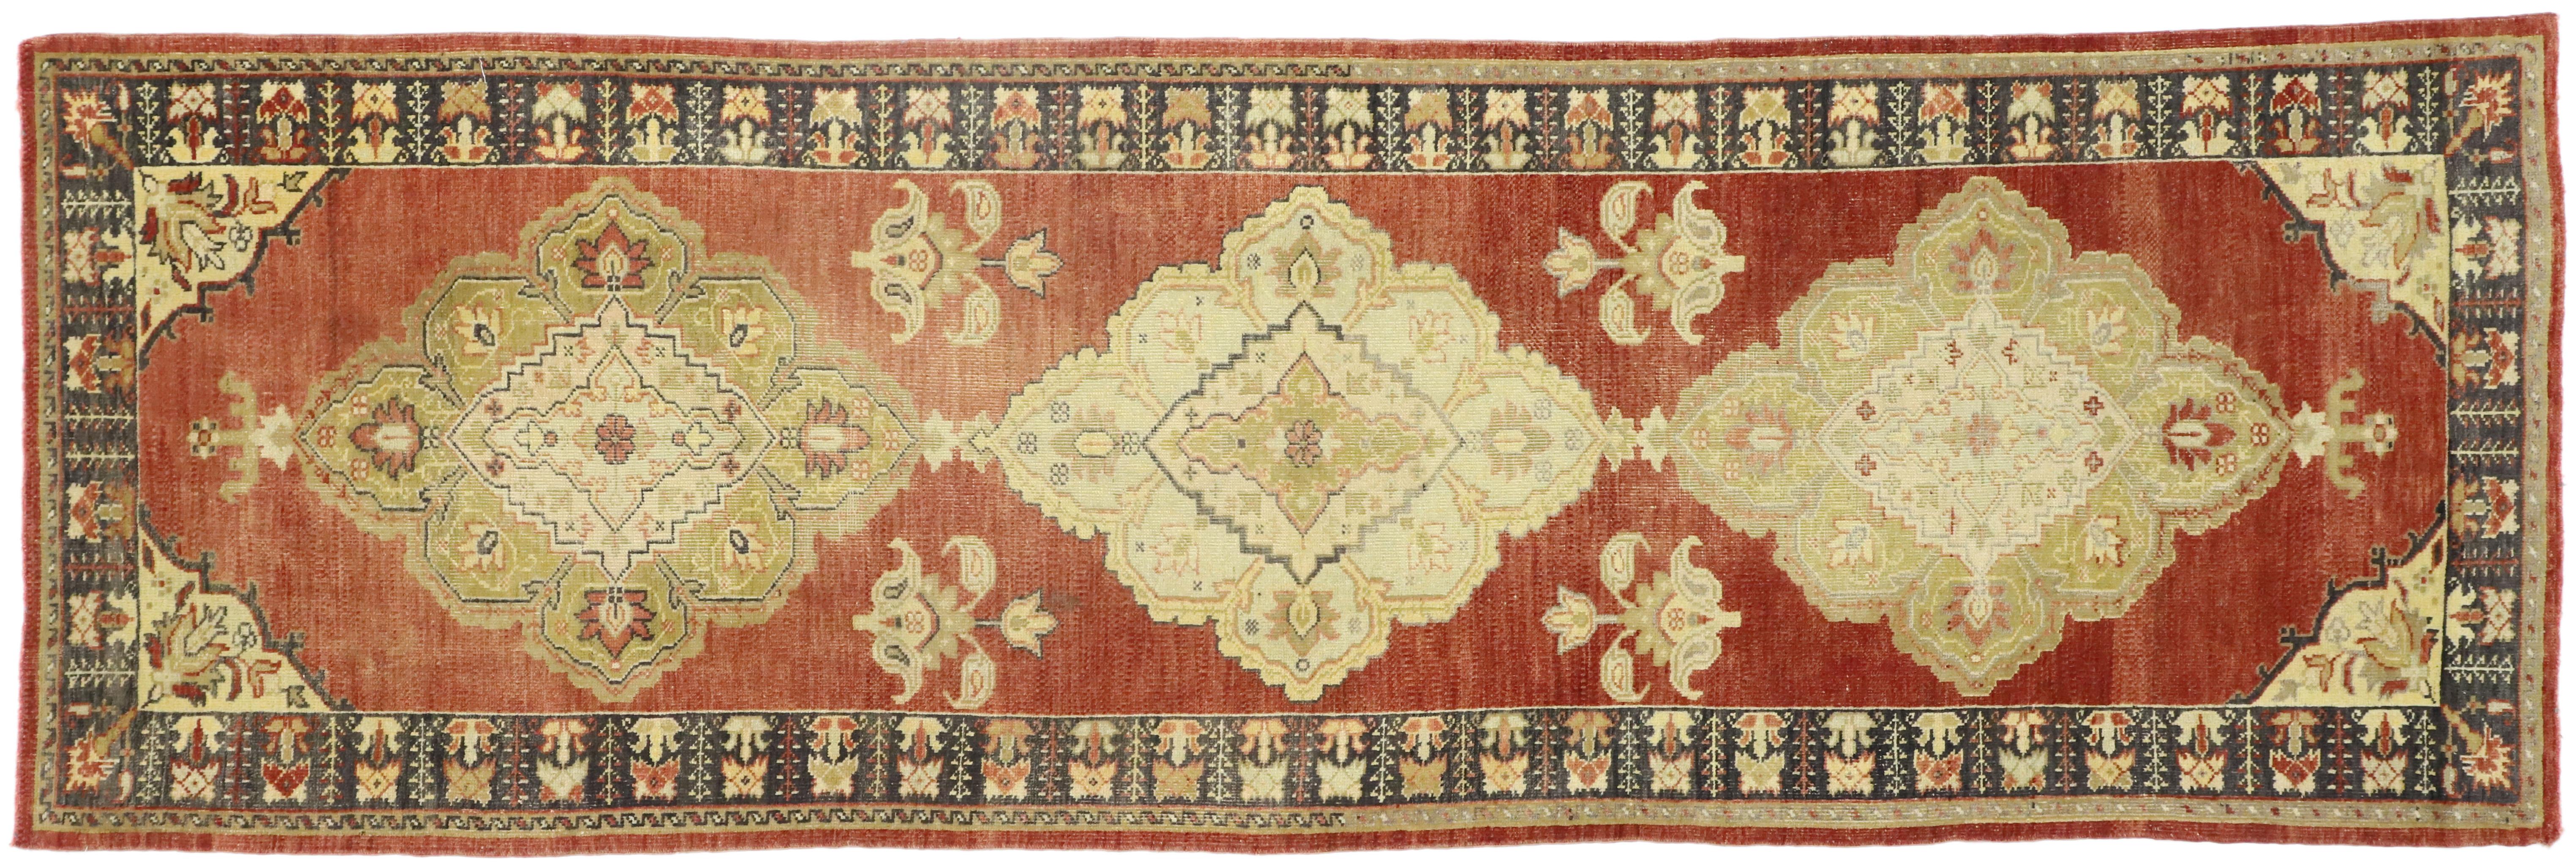 51660 Vintage Turkish Oushak Runner with Traditional Modern Rustic Style, Hallway Runner. This hand-knotted wool vintage Turkish Oushak runner features three diamond shaped medallions adorned with palmettes. The medallions rest on a field of